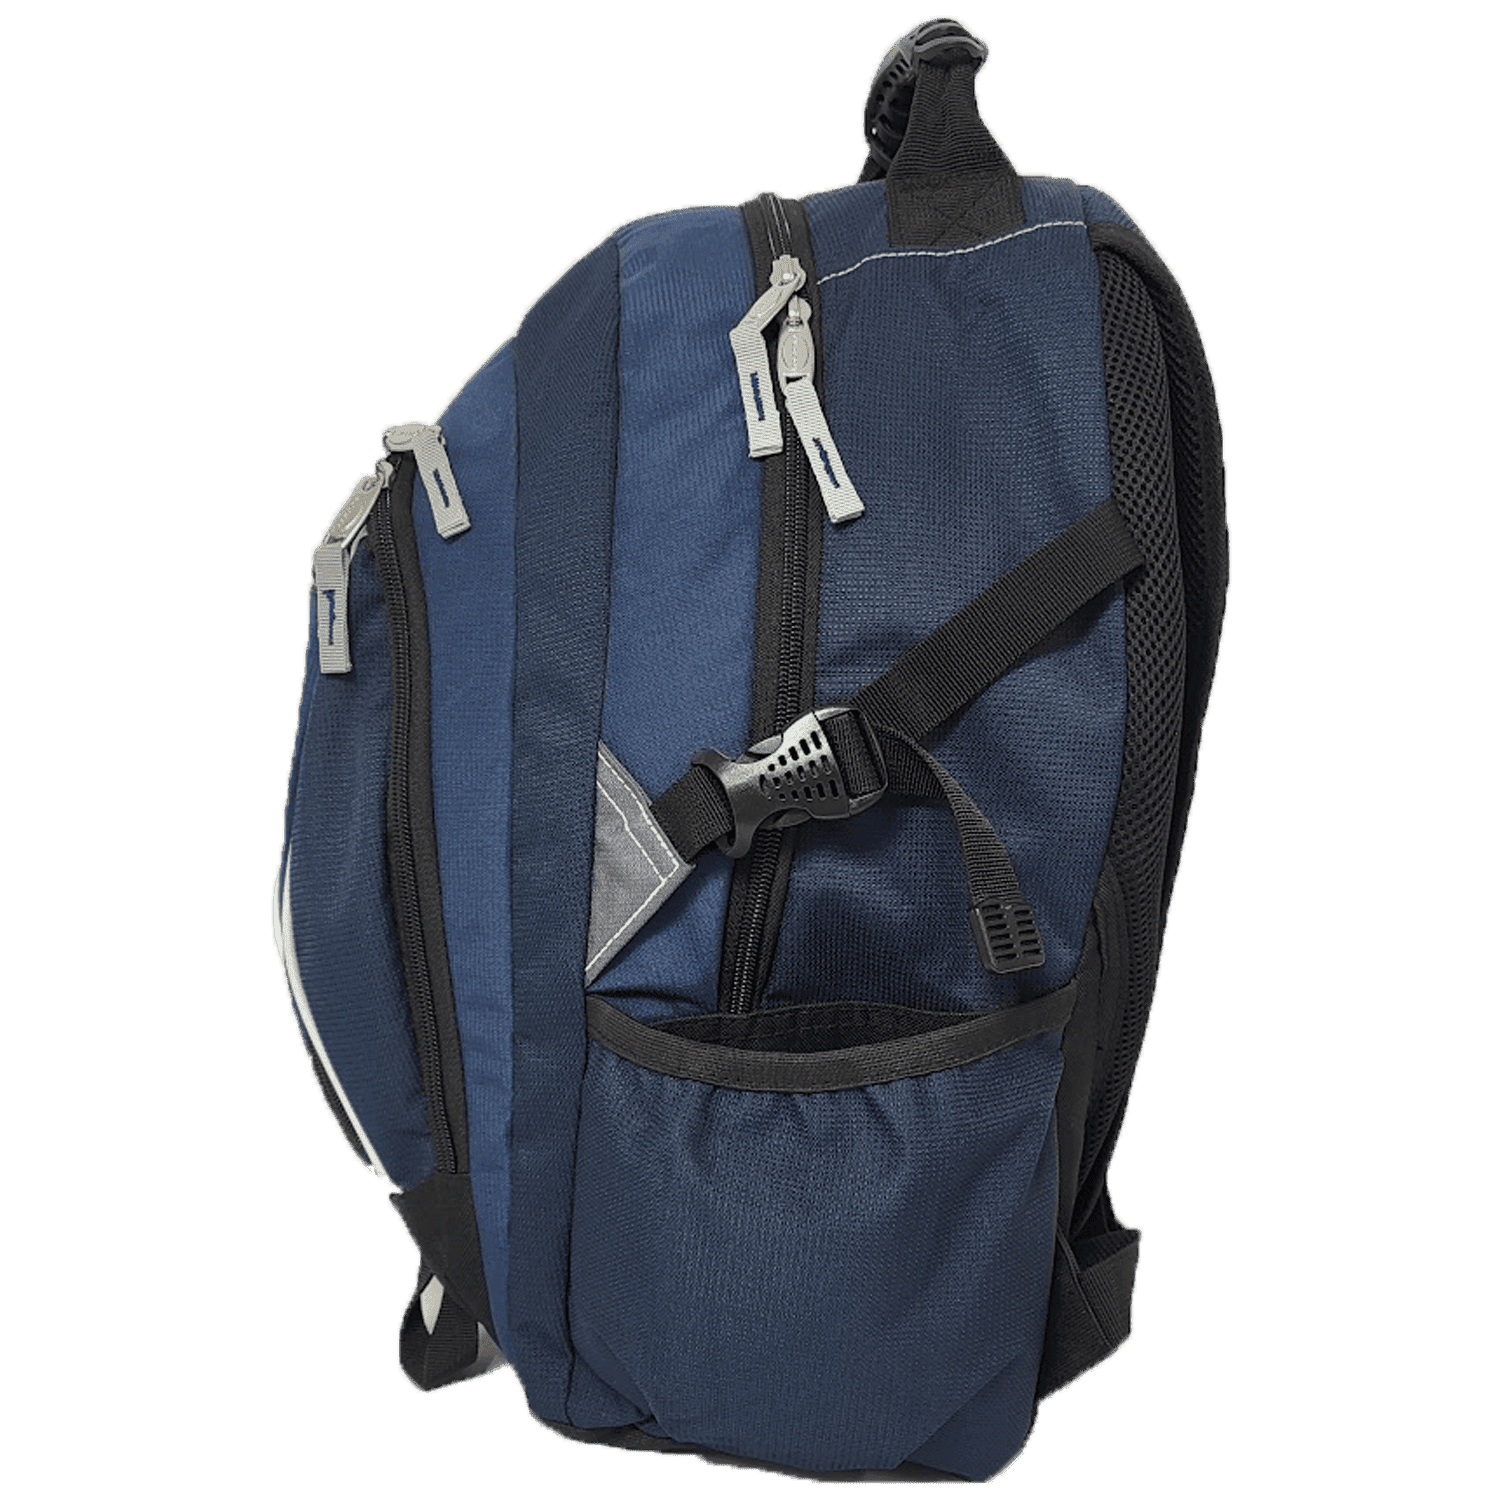 Sportech Ridge 53 – Bolton Backpack - Navy 3 Shaws Department Stores